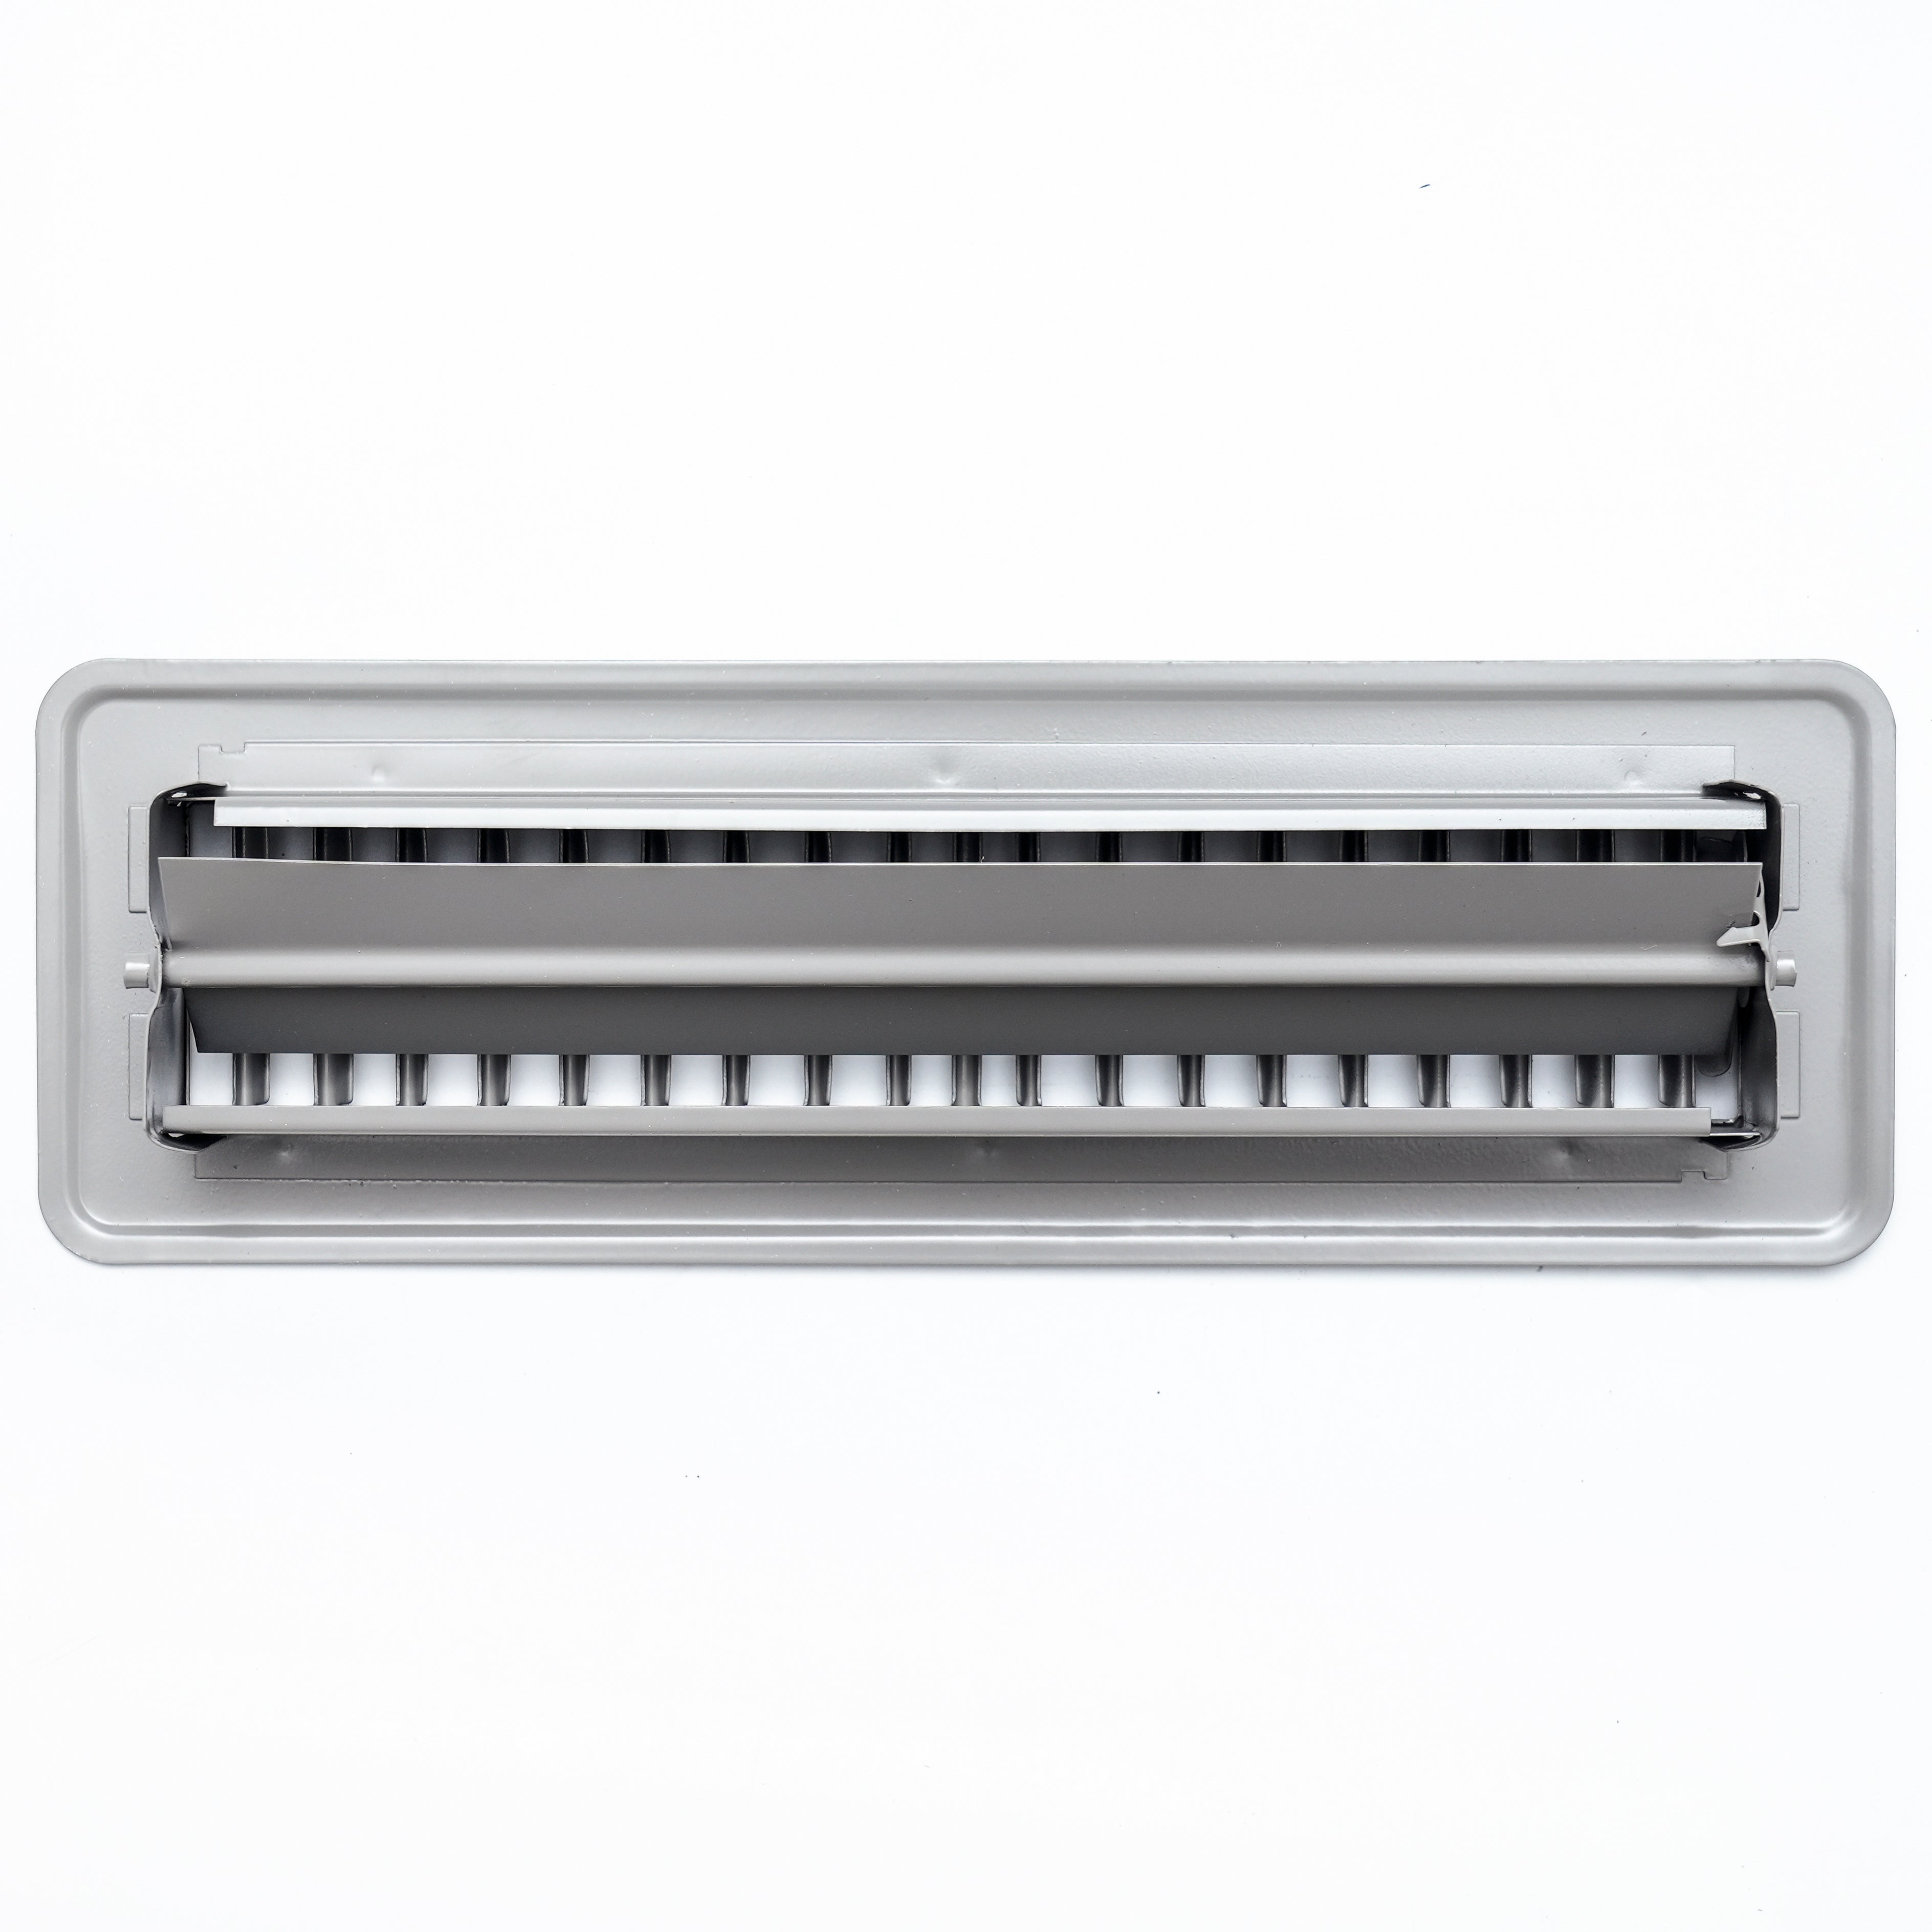 2" x 10"  Floor Register with Louvered Design | Heavy Duty Walkable Design with Damper | Floor Vent Grille | Easy to Adjust Air Supply lever | Gray